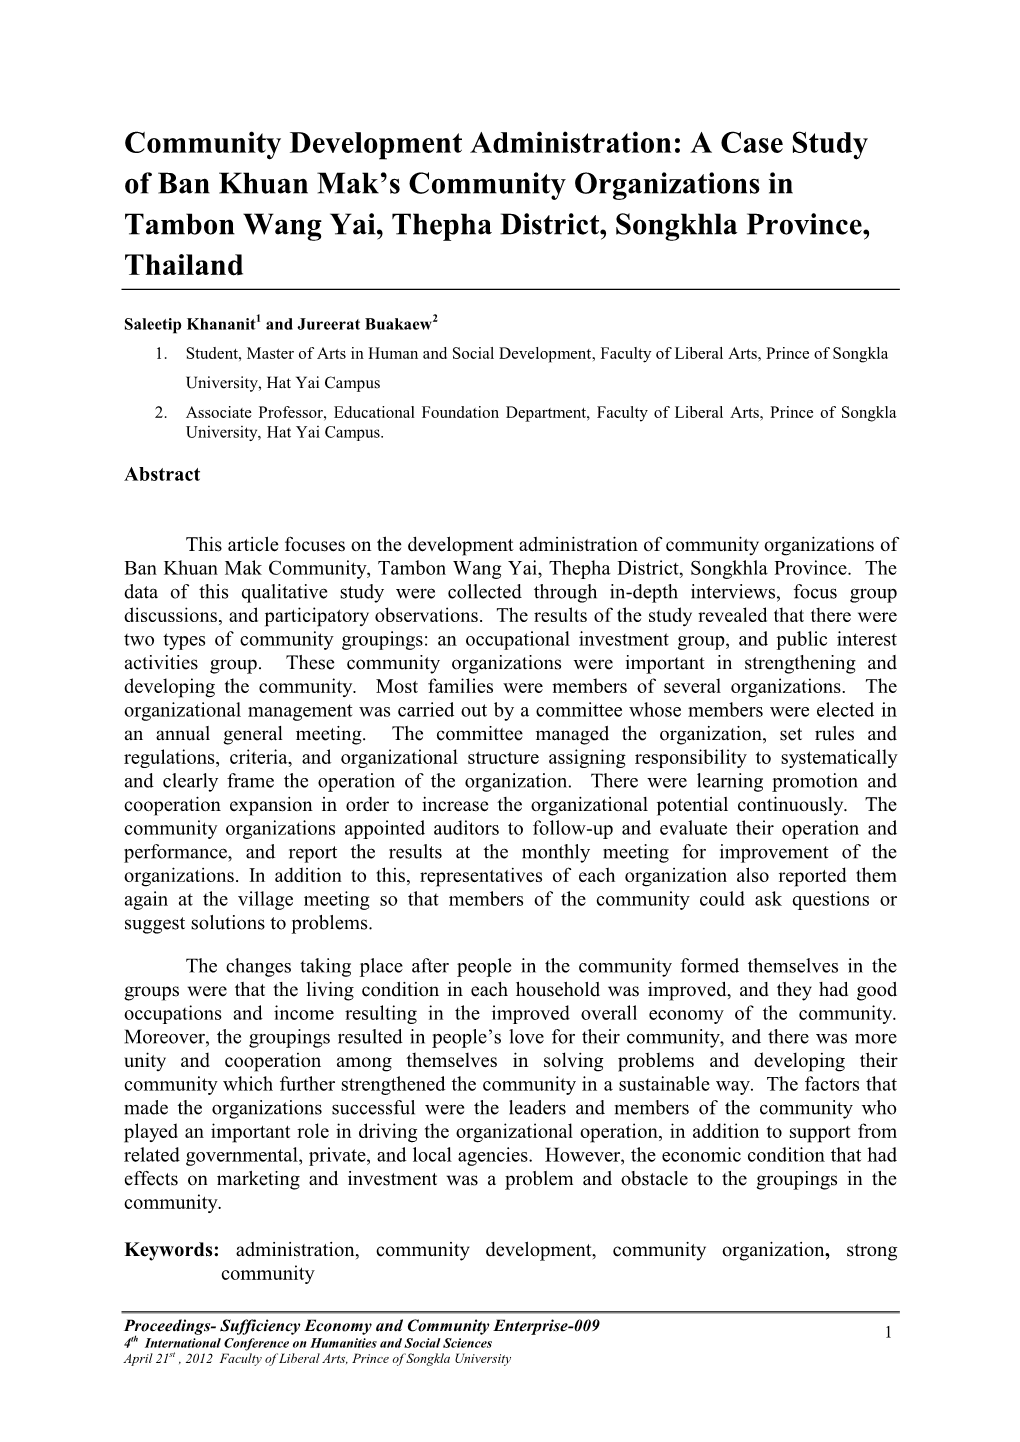 Community Development Administration: a Case Study of Ban Khuan Mak’S Community Organizations in Tambon Wang Yai, Thepha District, Songkhla Province, Thailand